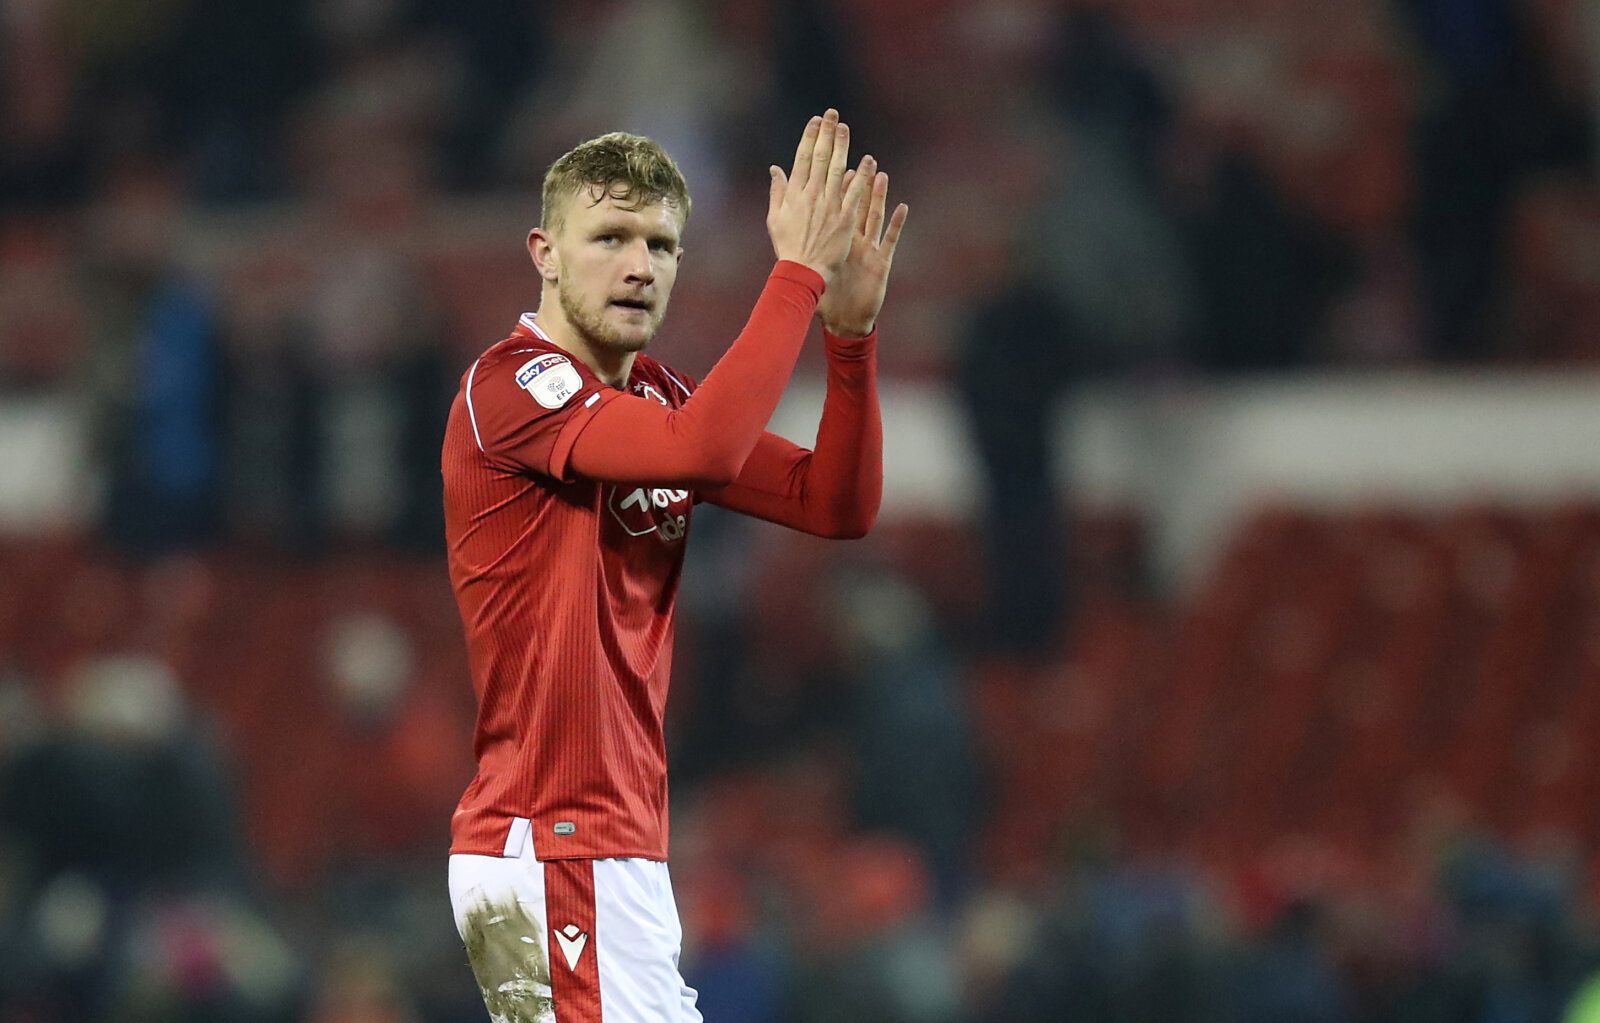 Soccer Football - Championship - Nottingham Forest v Blackburn Rovers - The City Ground, Nottingham, Britain - January 1, 2020   Nottingham Forest's Joe Worrall applauds fans after the match   Action Images/John Clifton    EDITORIAL USE ONLY. No use with unauthorized audio, video, data, fixture lists, club/league logos or "live" services. Online in-match use limited to 75 images, no video emulation. No use in betting, games or single club/league/player publications.  Please contact your account 